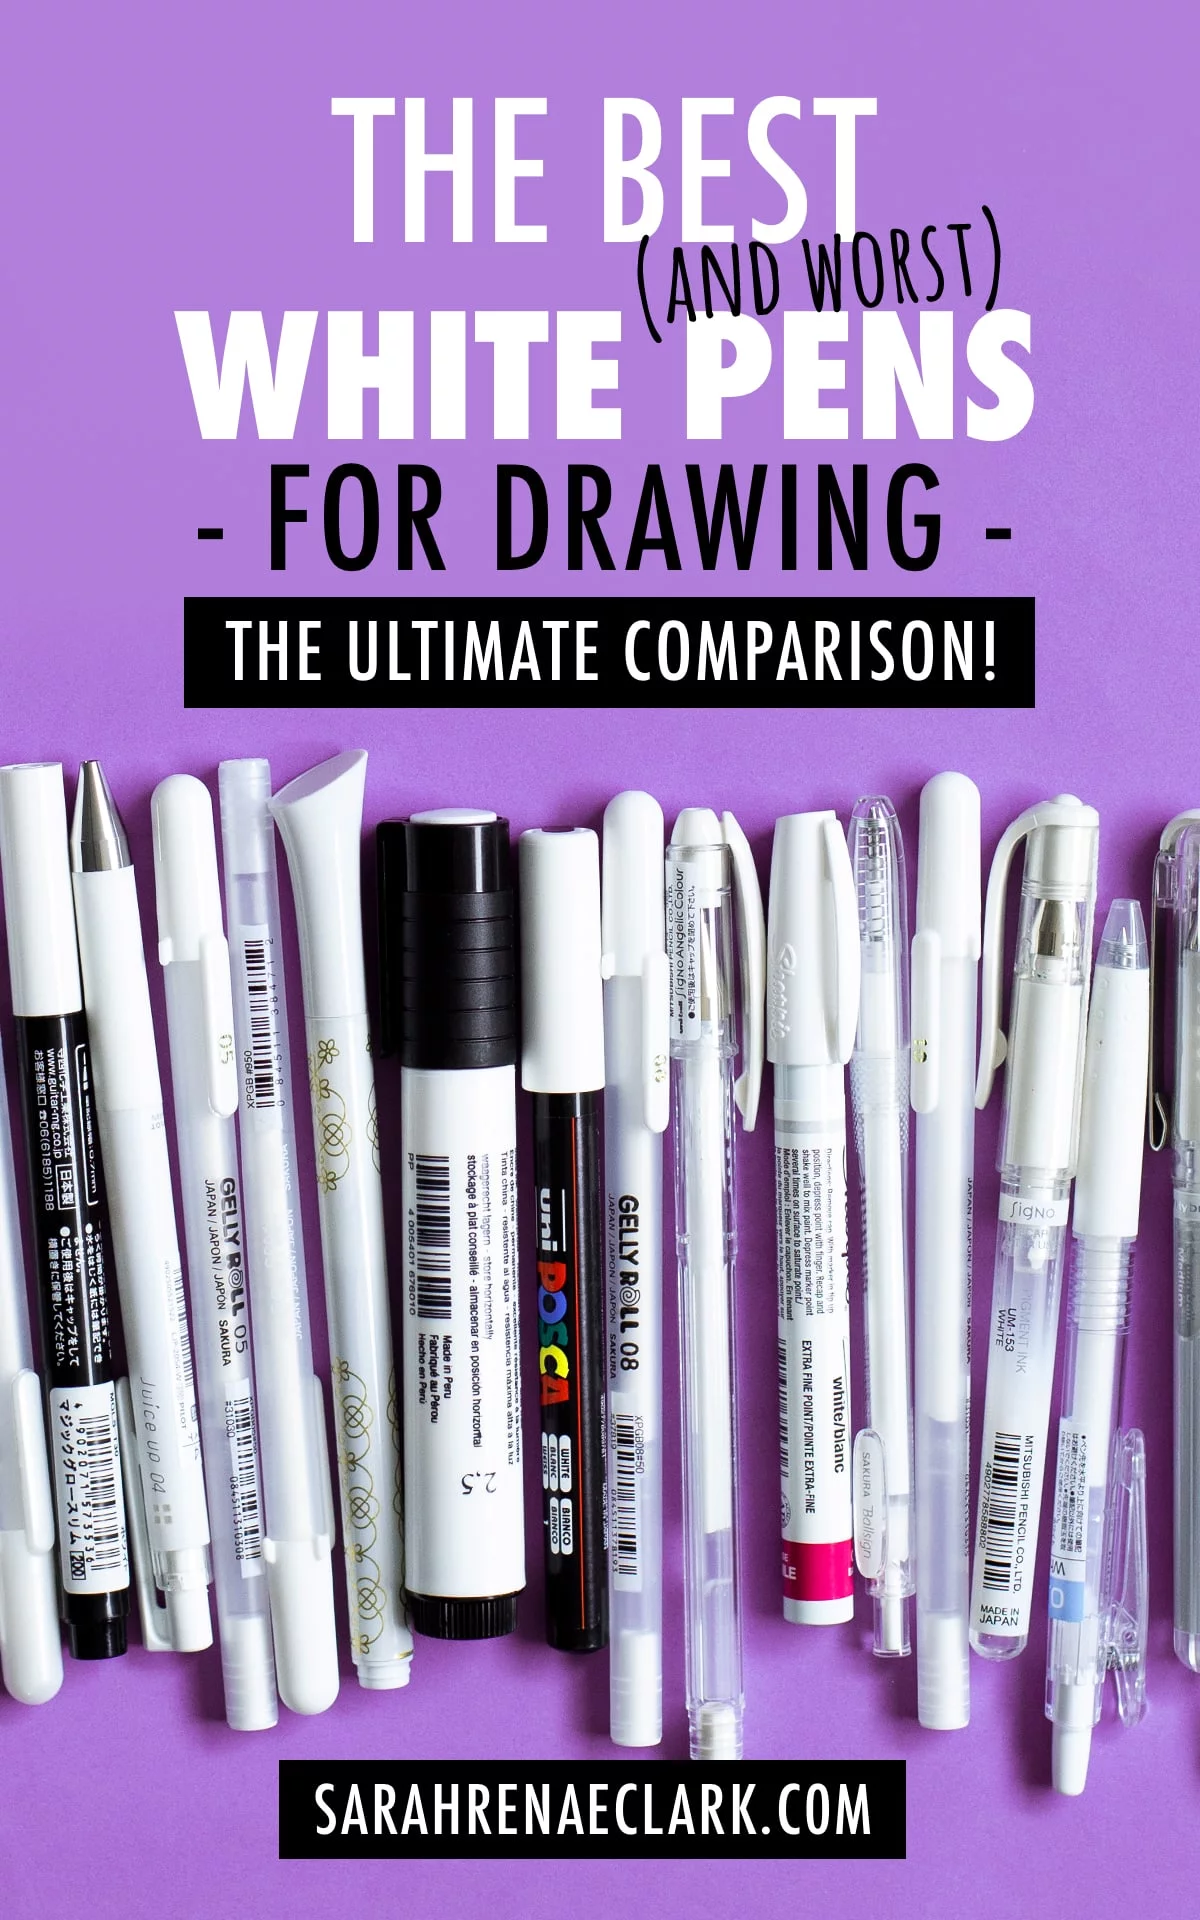 The Ultimate White Pen Shopping Guide - 61 White Pens Compared!